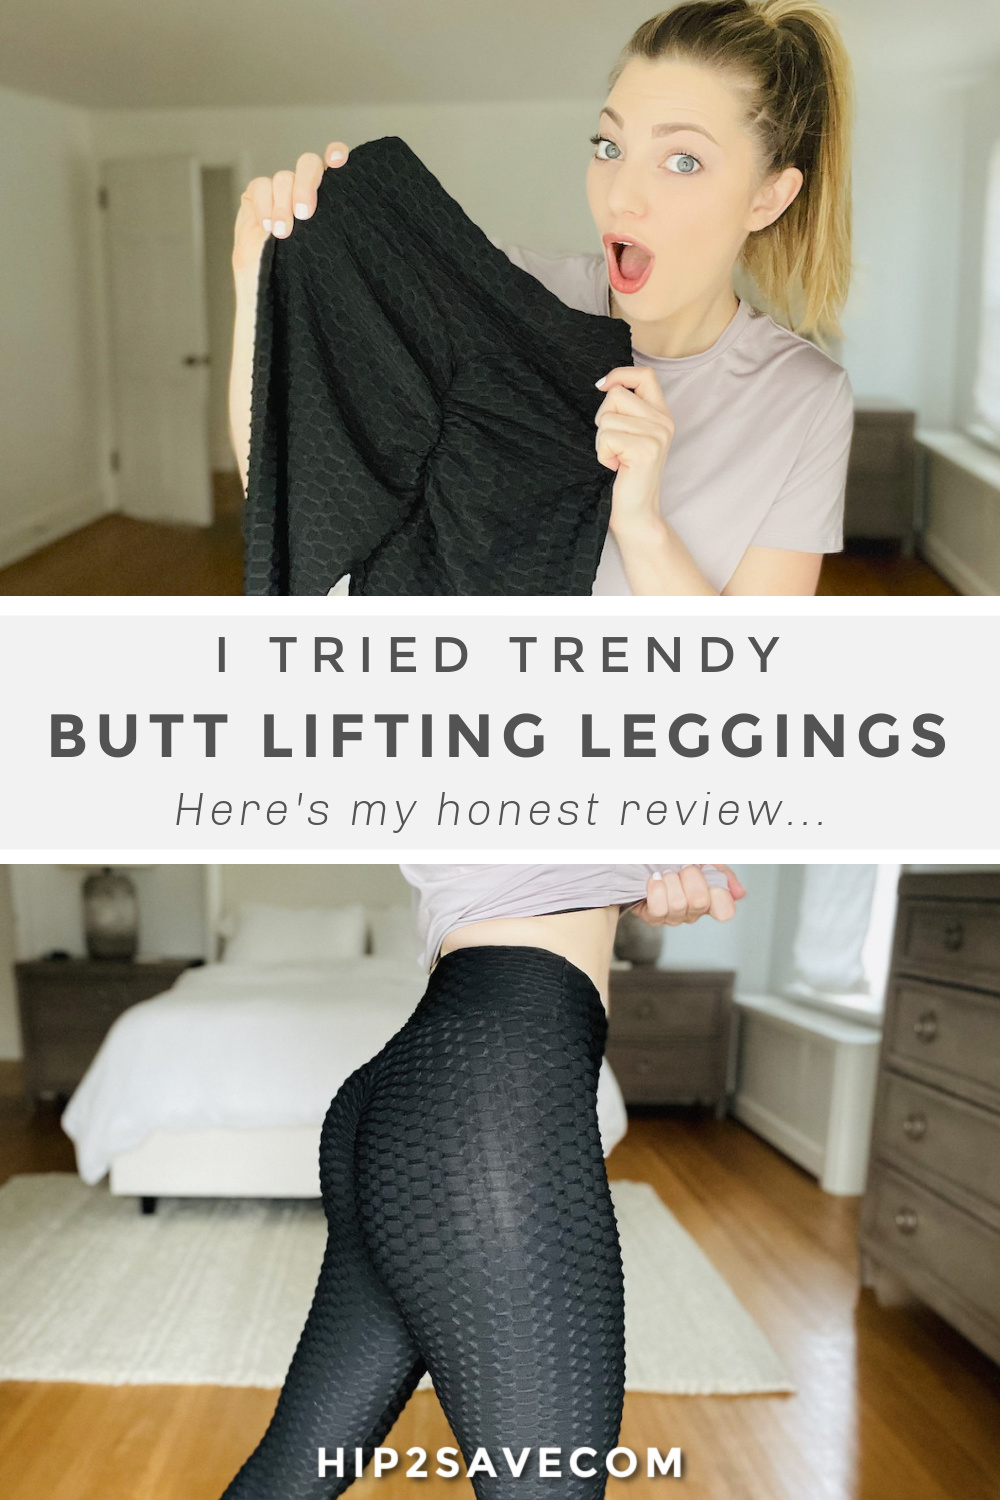 We Tried the Butt Lifting Leggings Everyone's Raving About... | Hip2Save